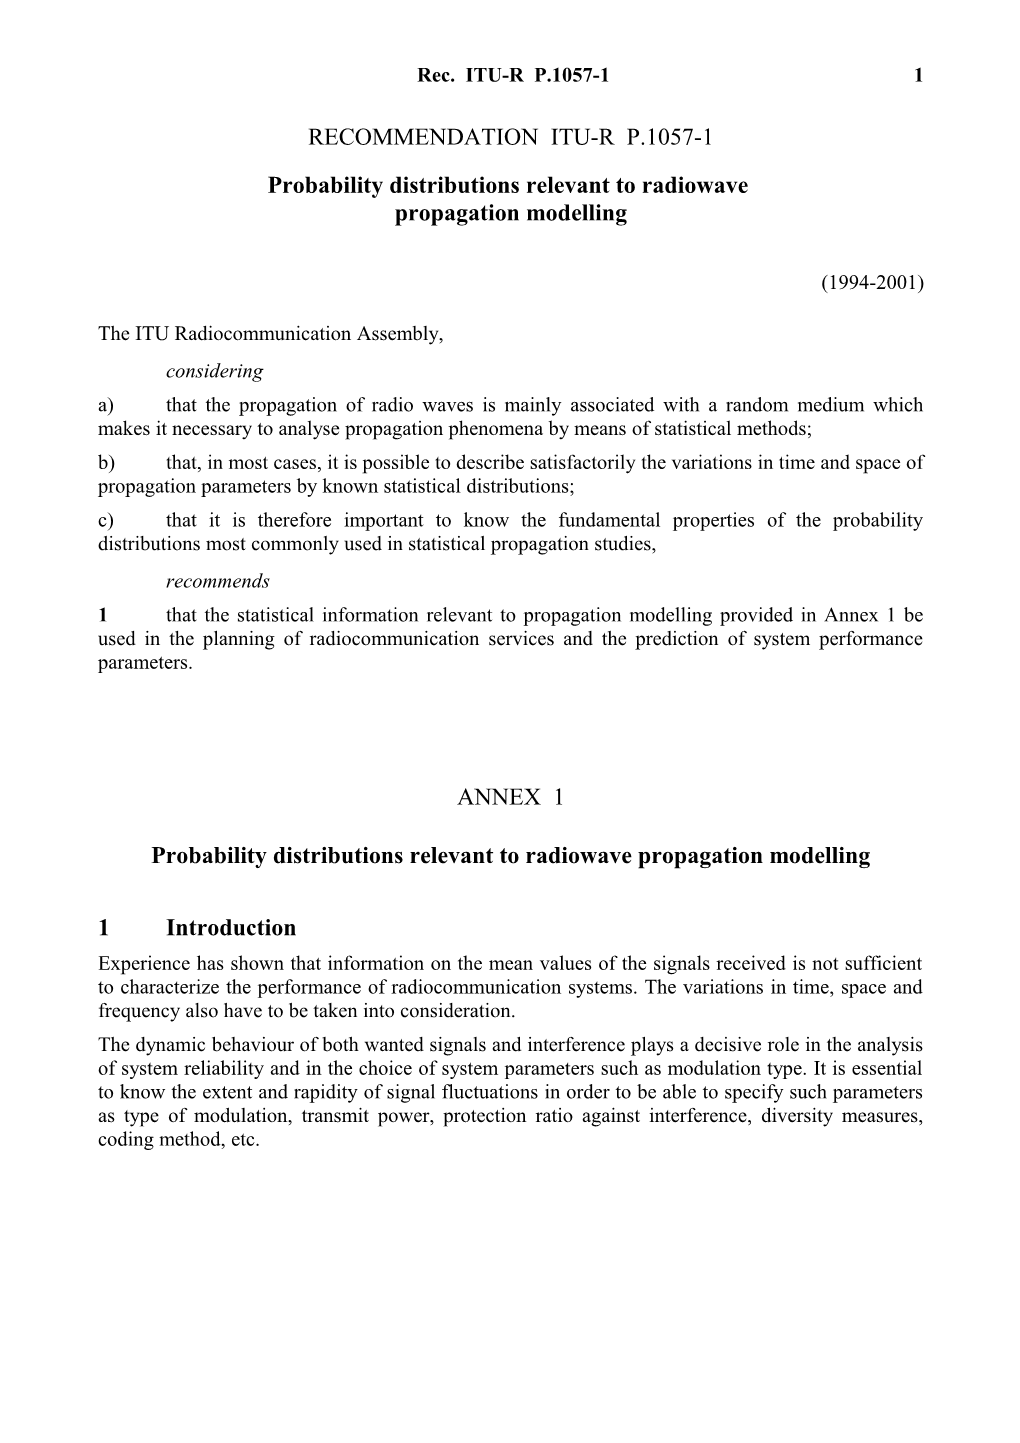 RECOMMENDATION ITU-R P.1057-1 - Probability Distributions Relevant to Radiowave Propagation